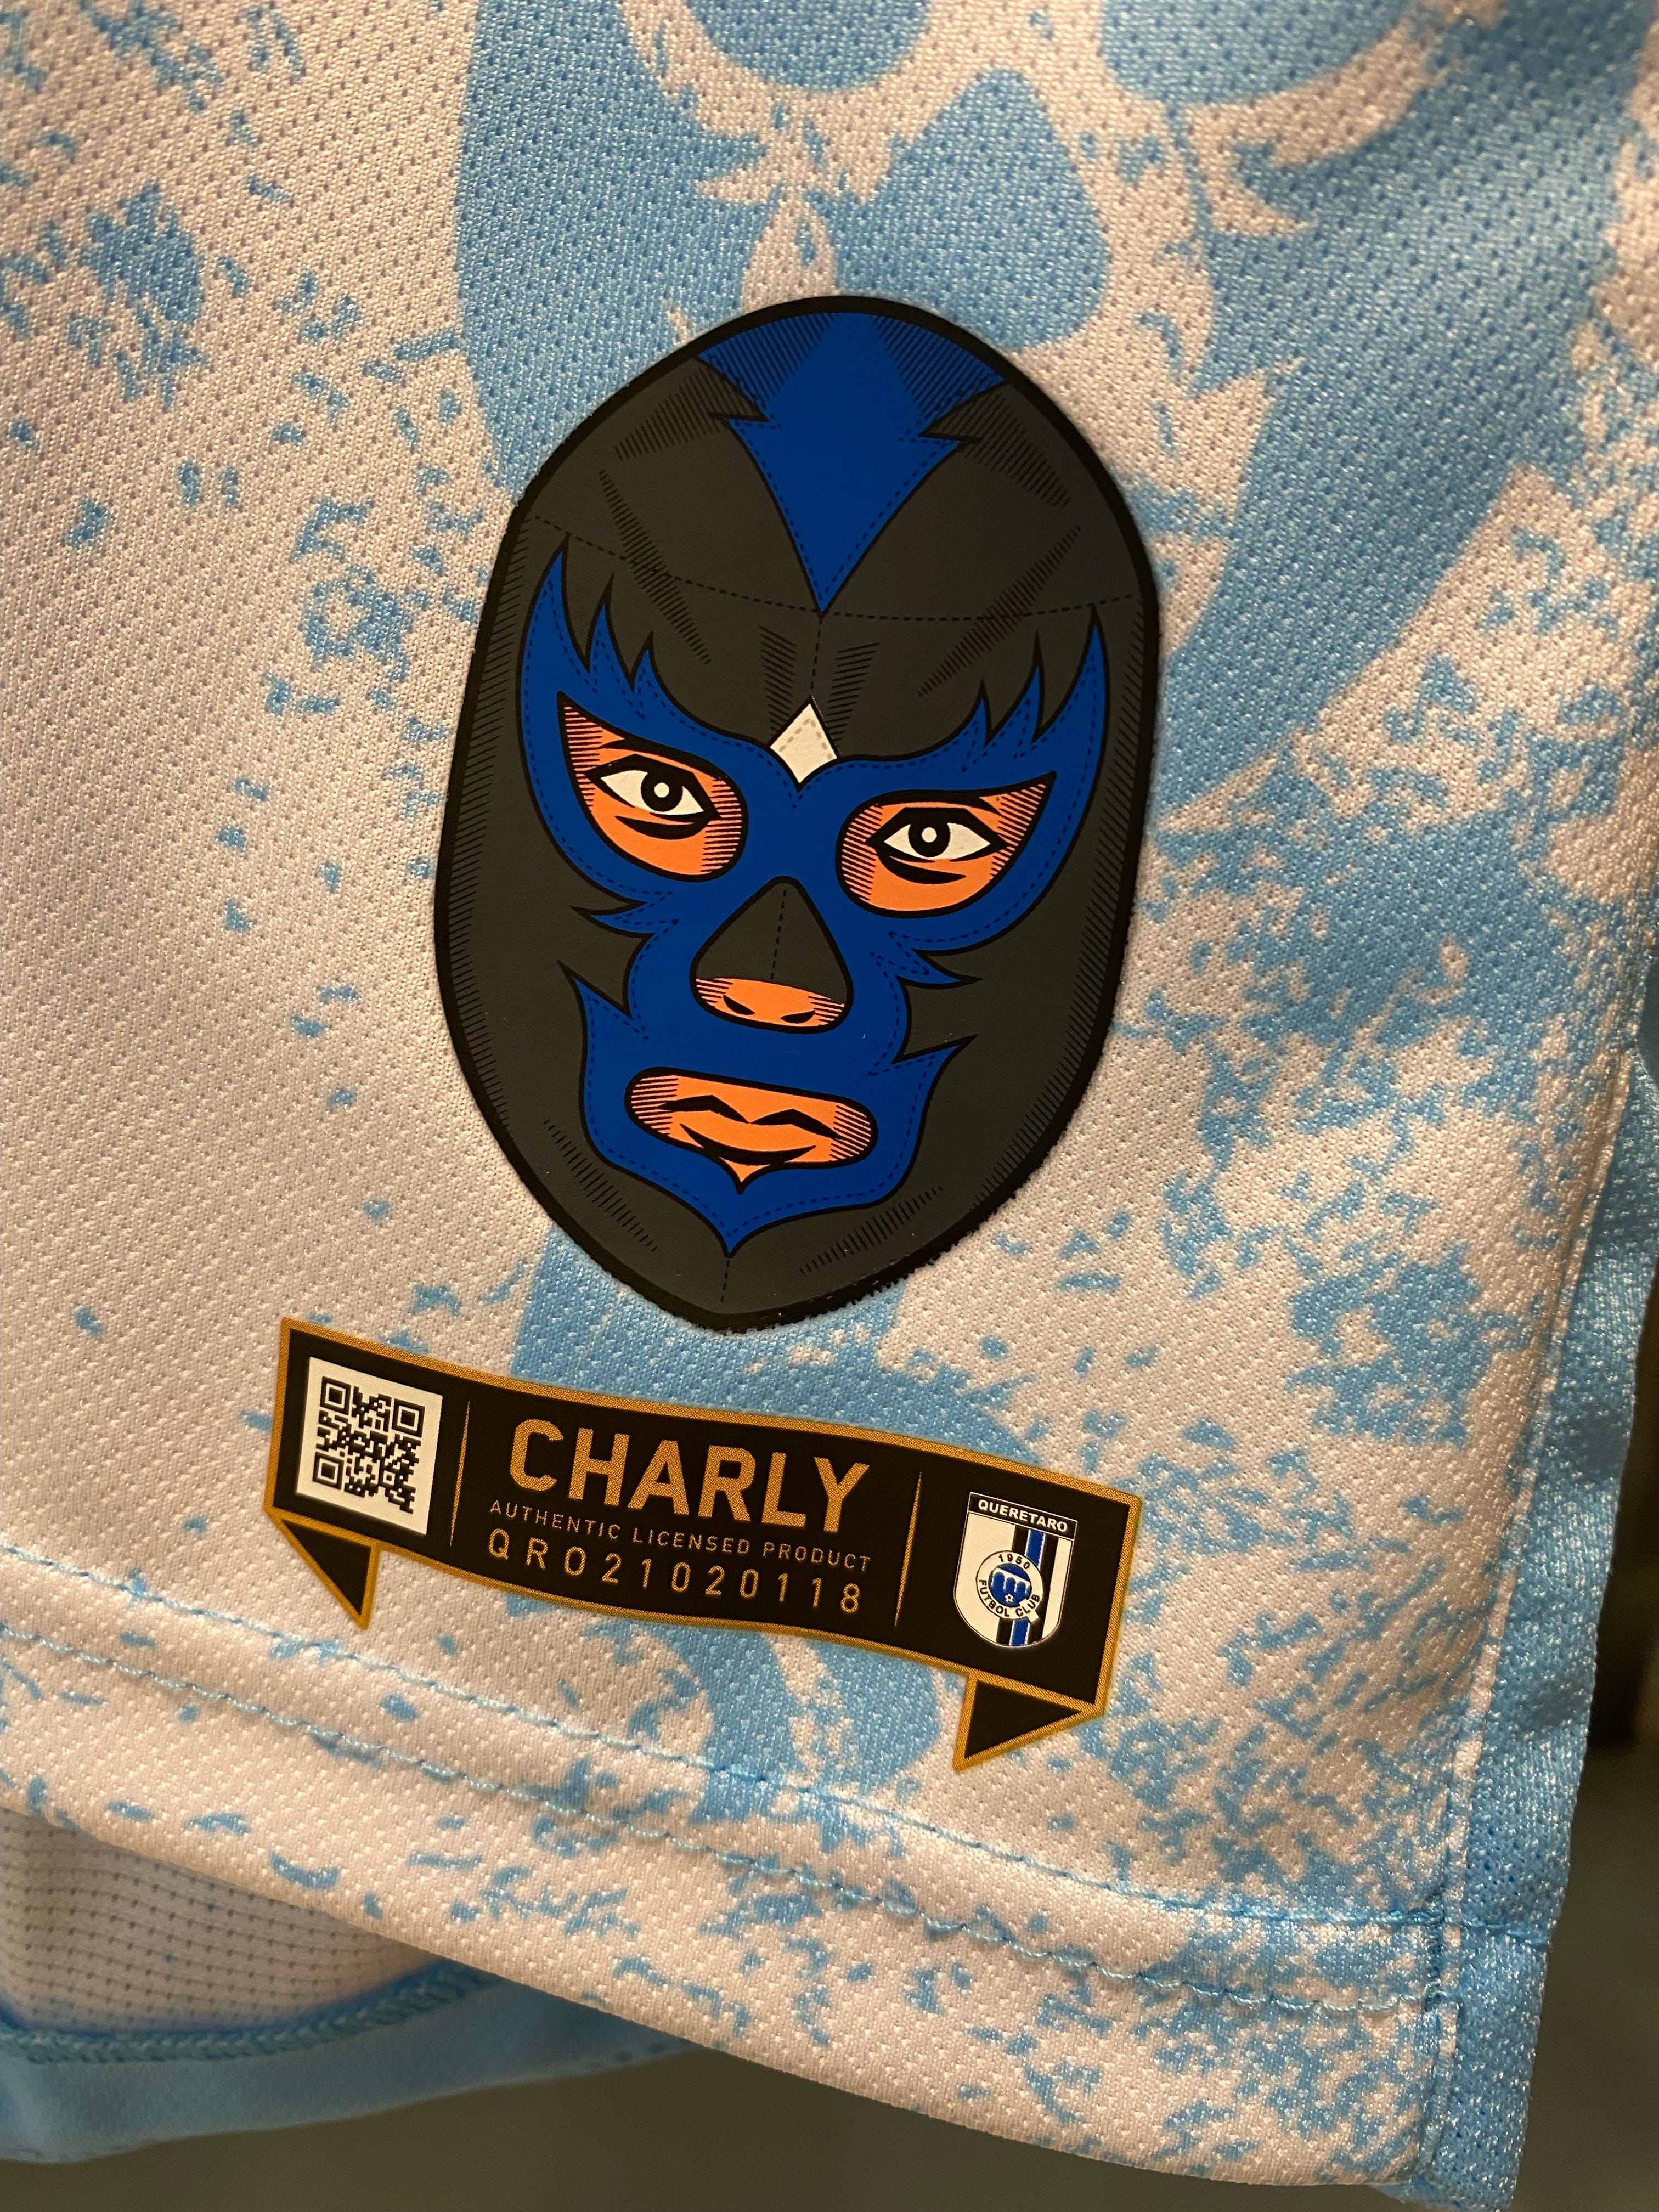 Mexican Brand Charly Enter US Market - Footy Headlines